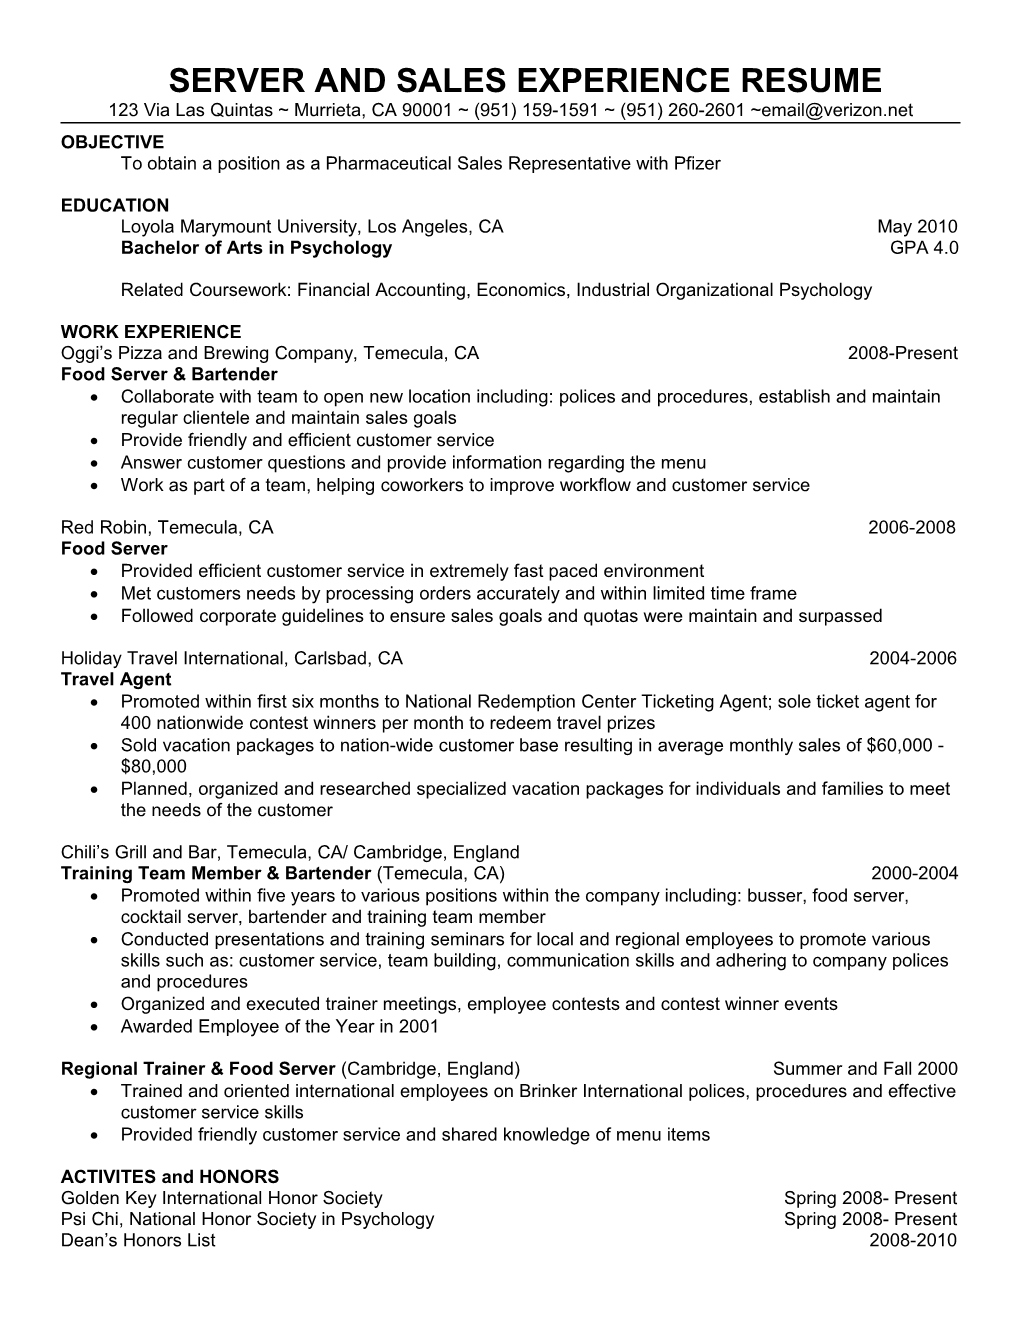 Server and Sales Experience Resume